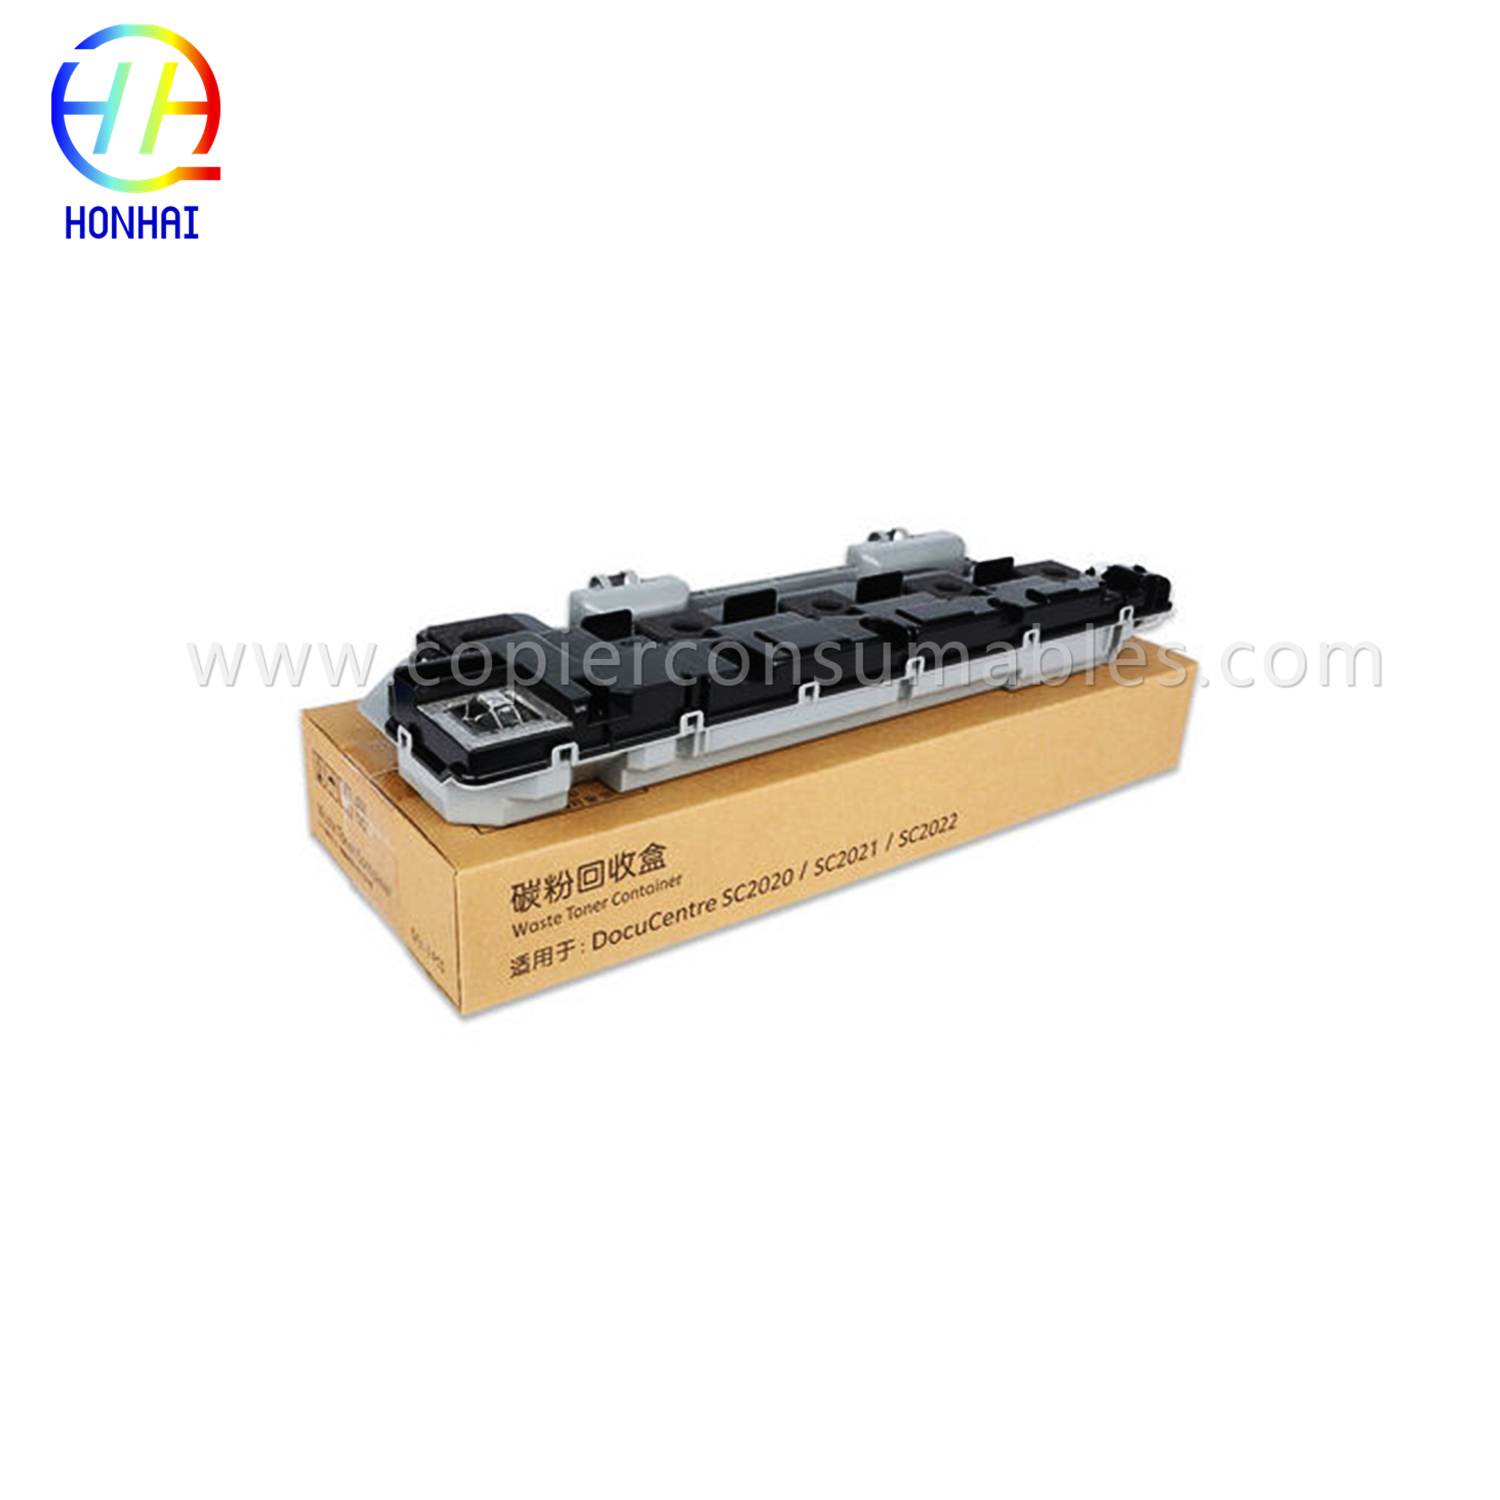 Waste Toner Container for Xerox Sc2020 Sc2021 2020 2021 (CWAA0869)